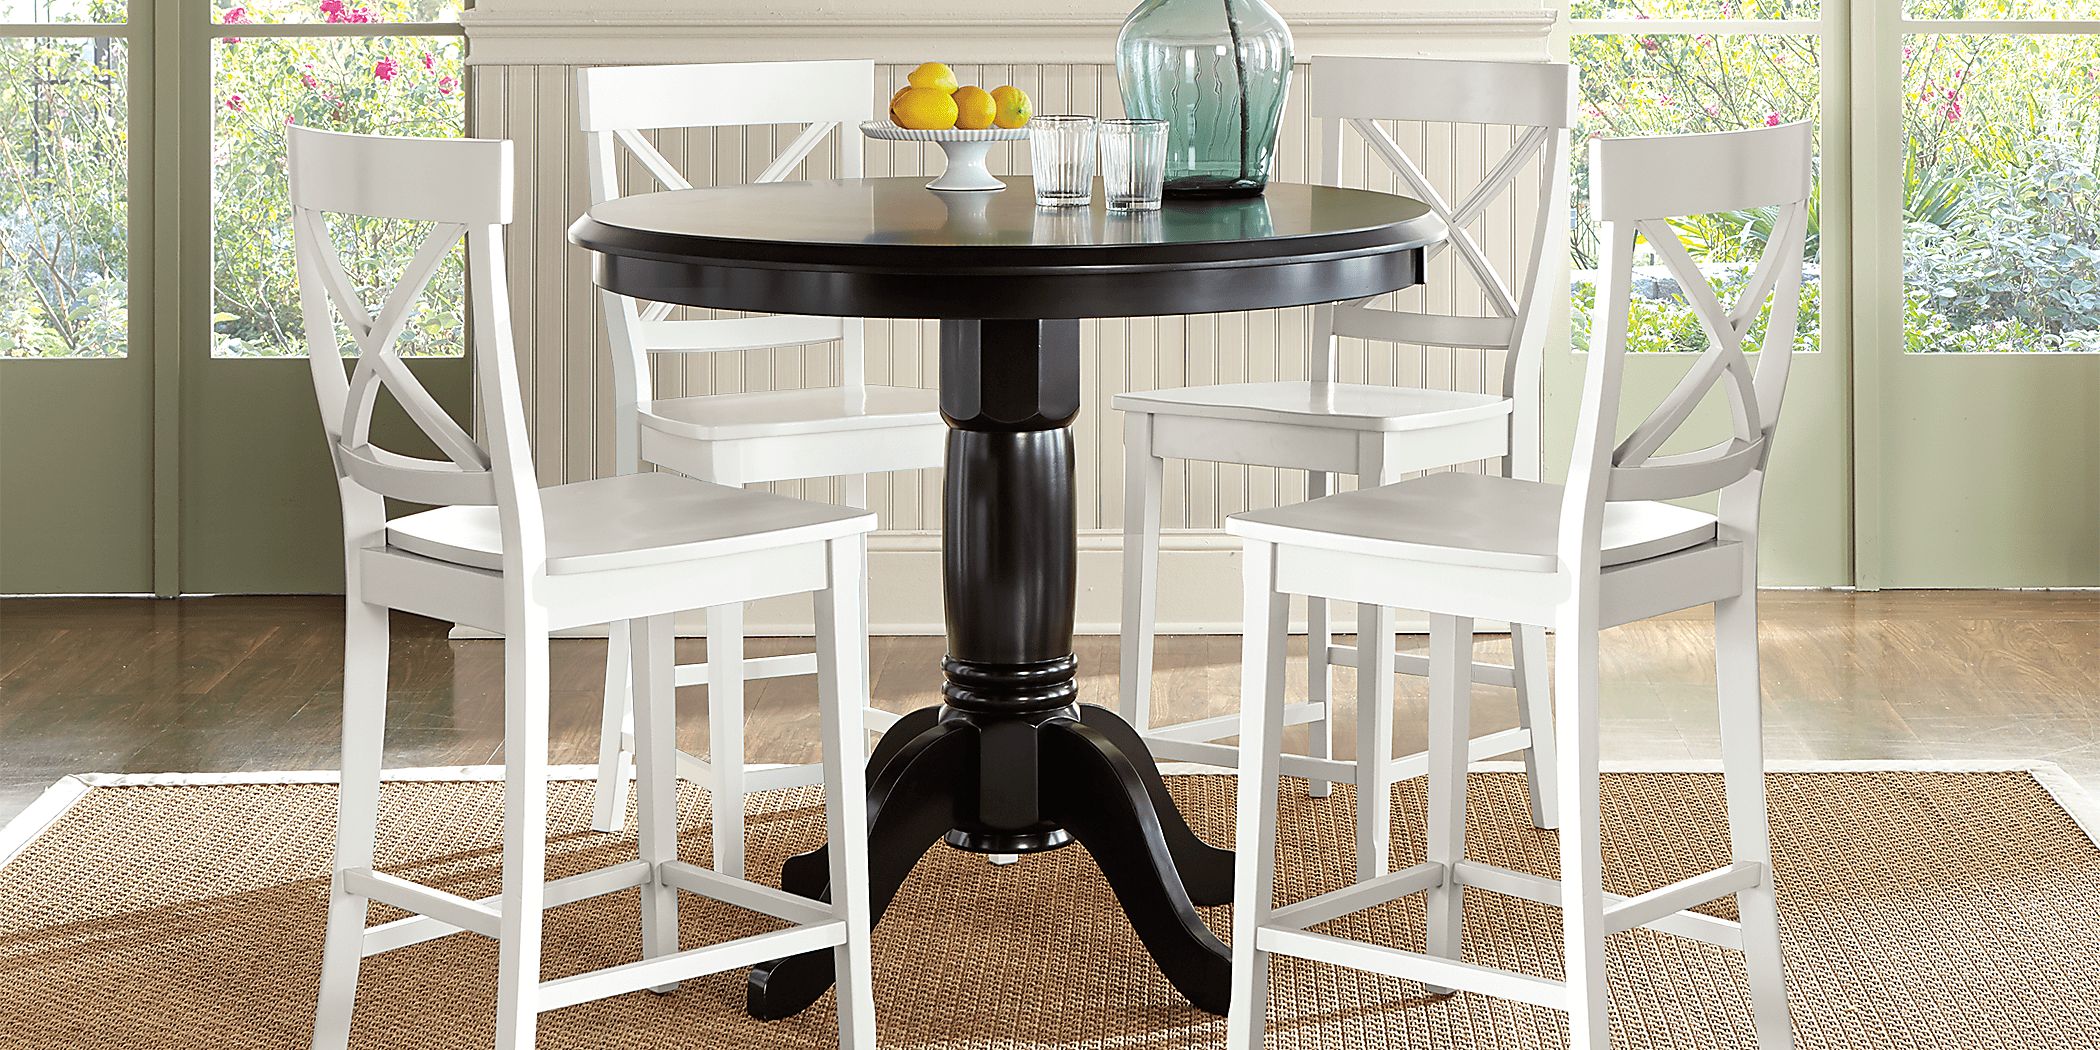 Brynwood Black 5 Pc Counter Height Dining Set with White Stools